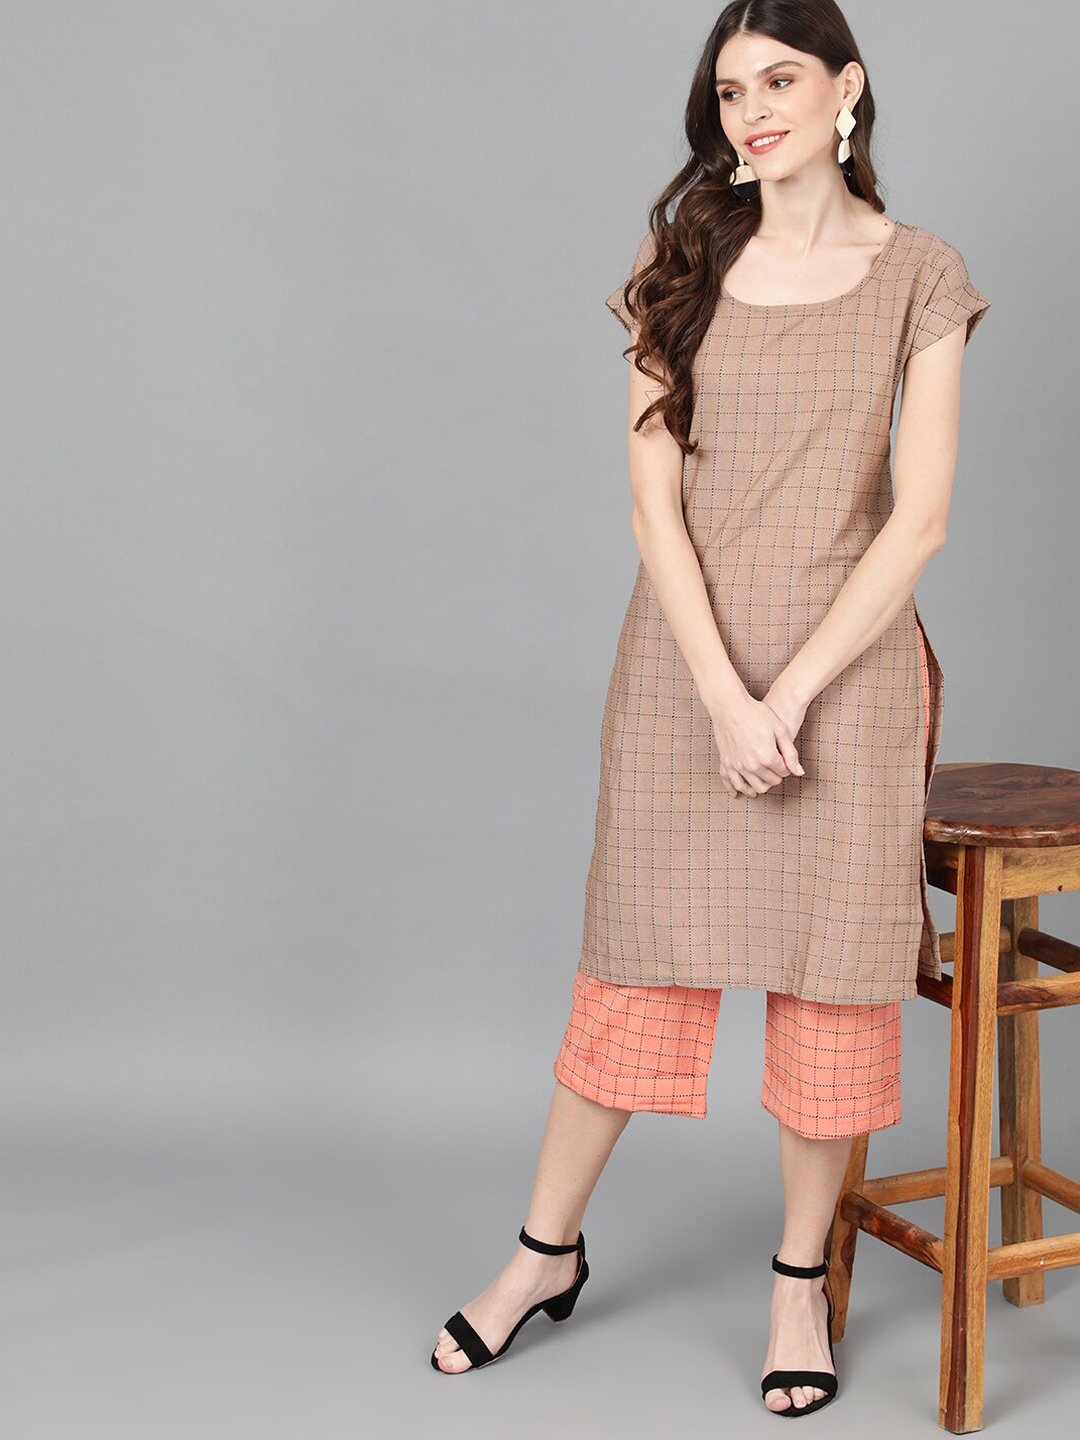 Women's  Brown & Peach-Coloured Embroidered Kurta with Trousers - AKS